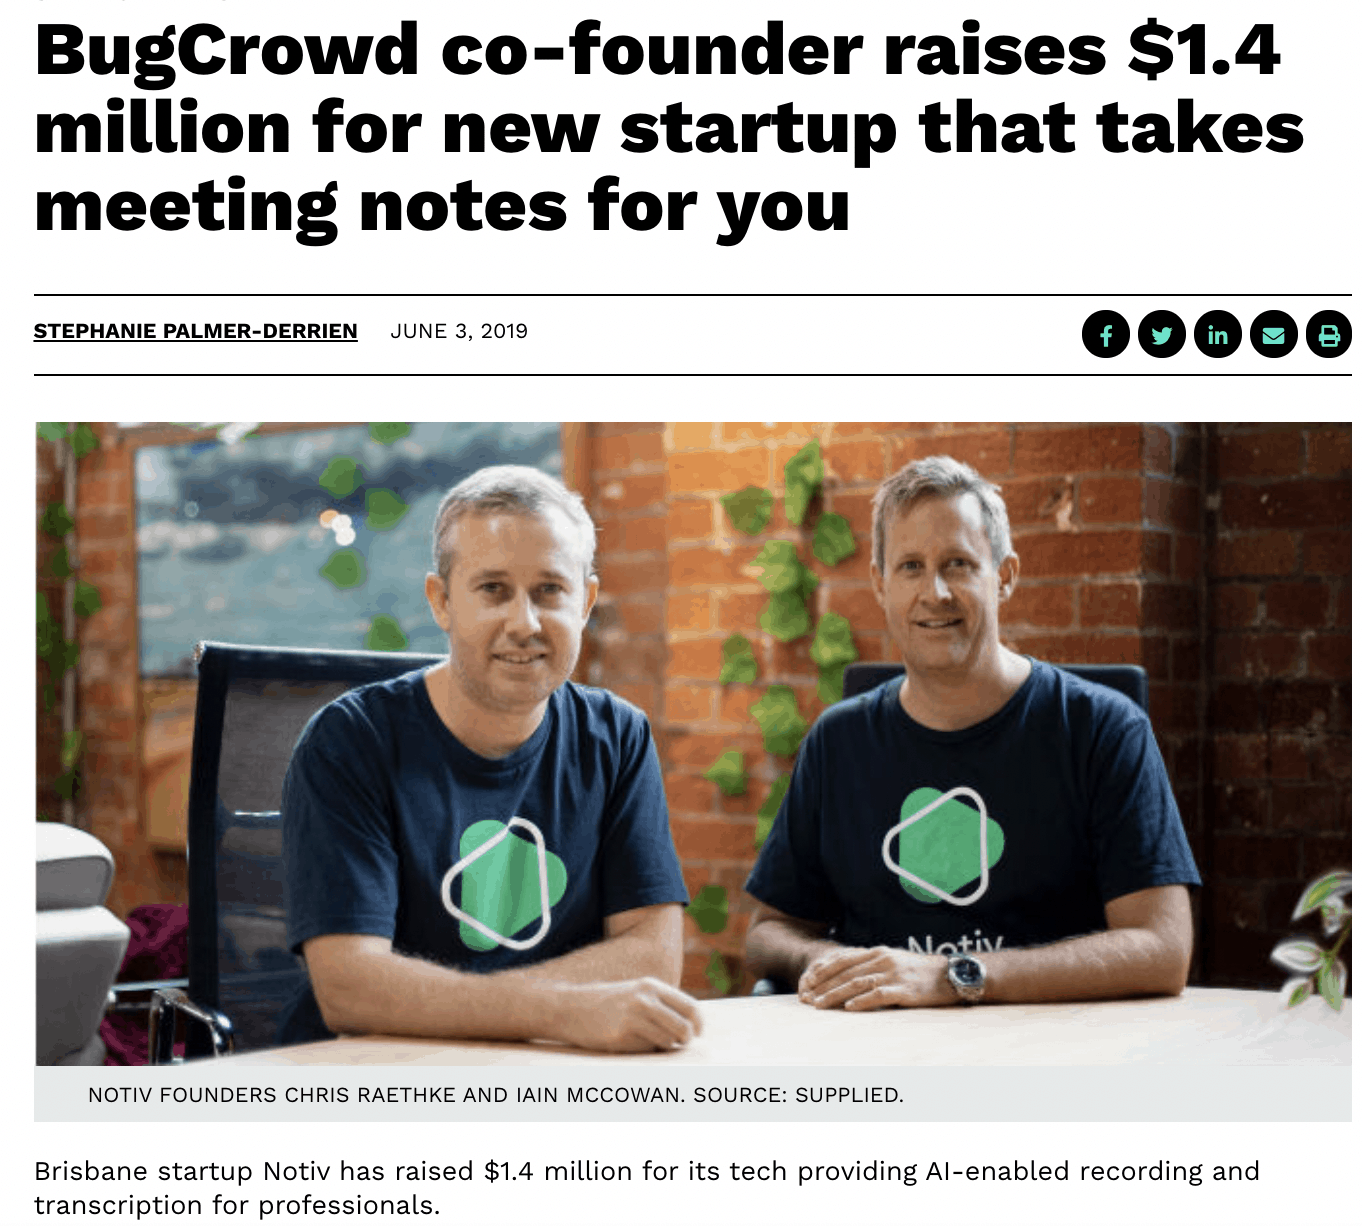 BugCrowd co-founder